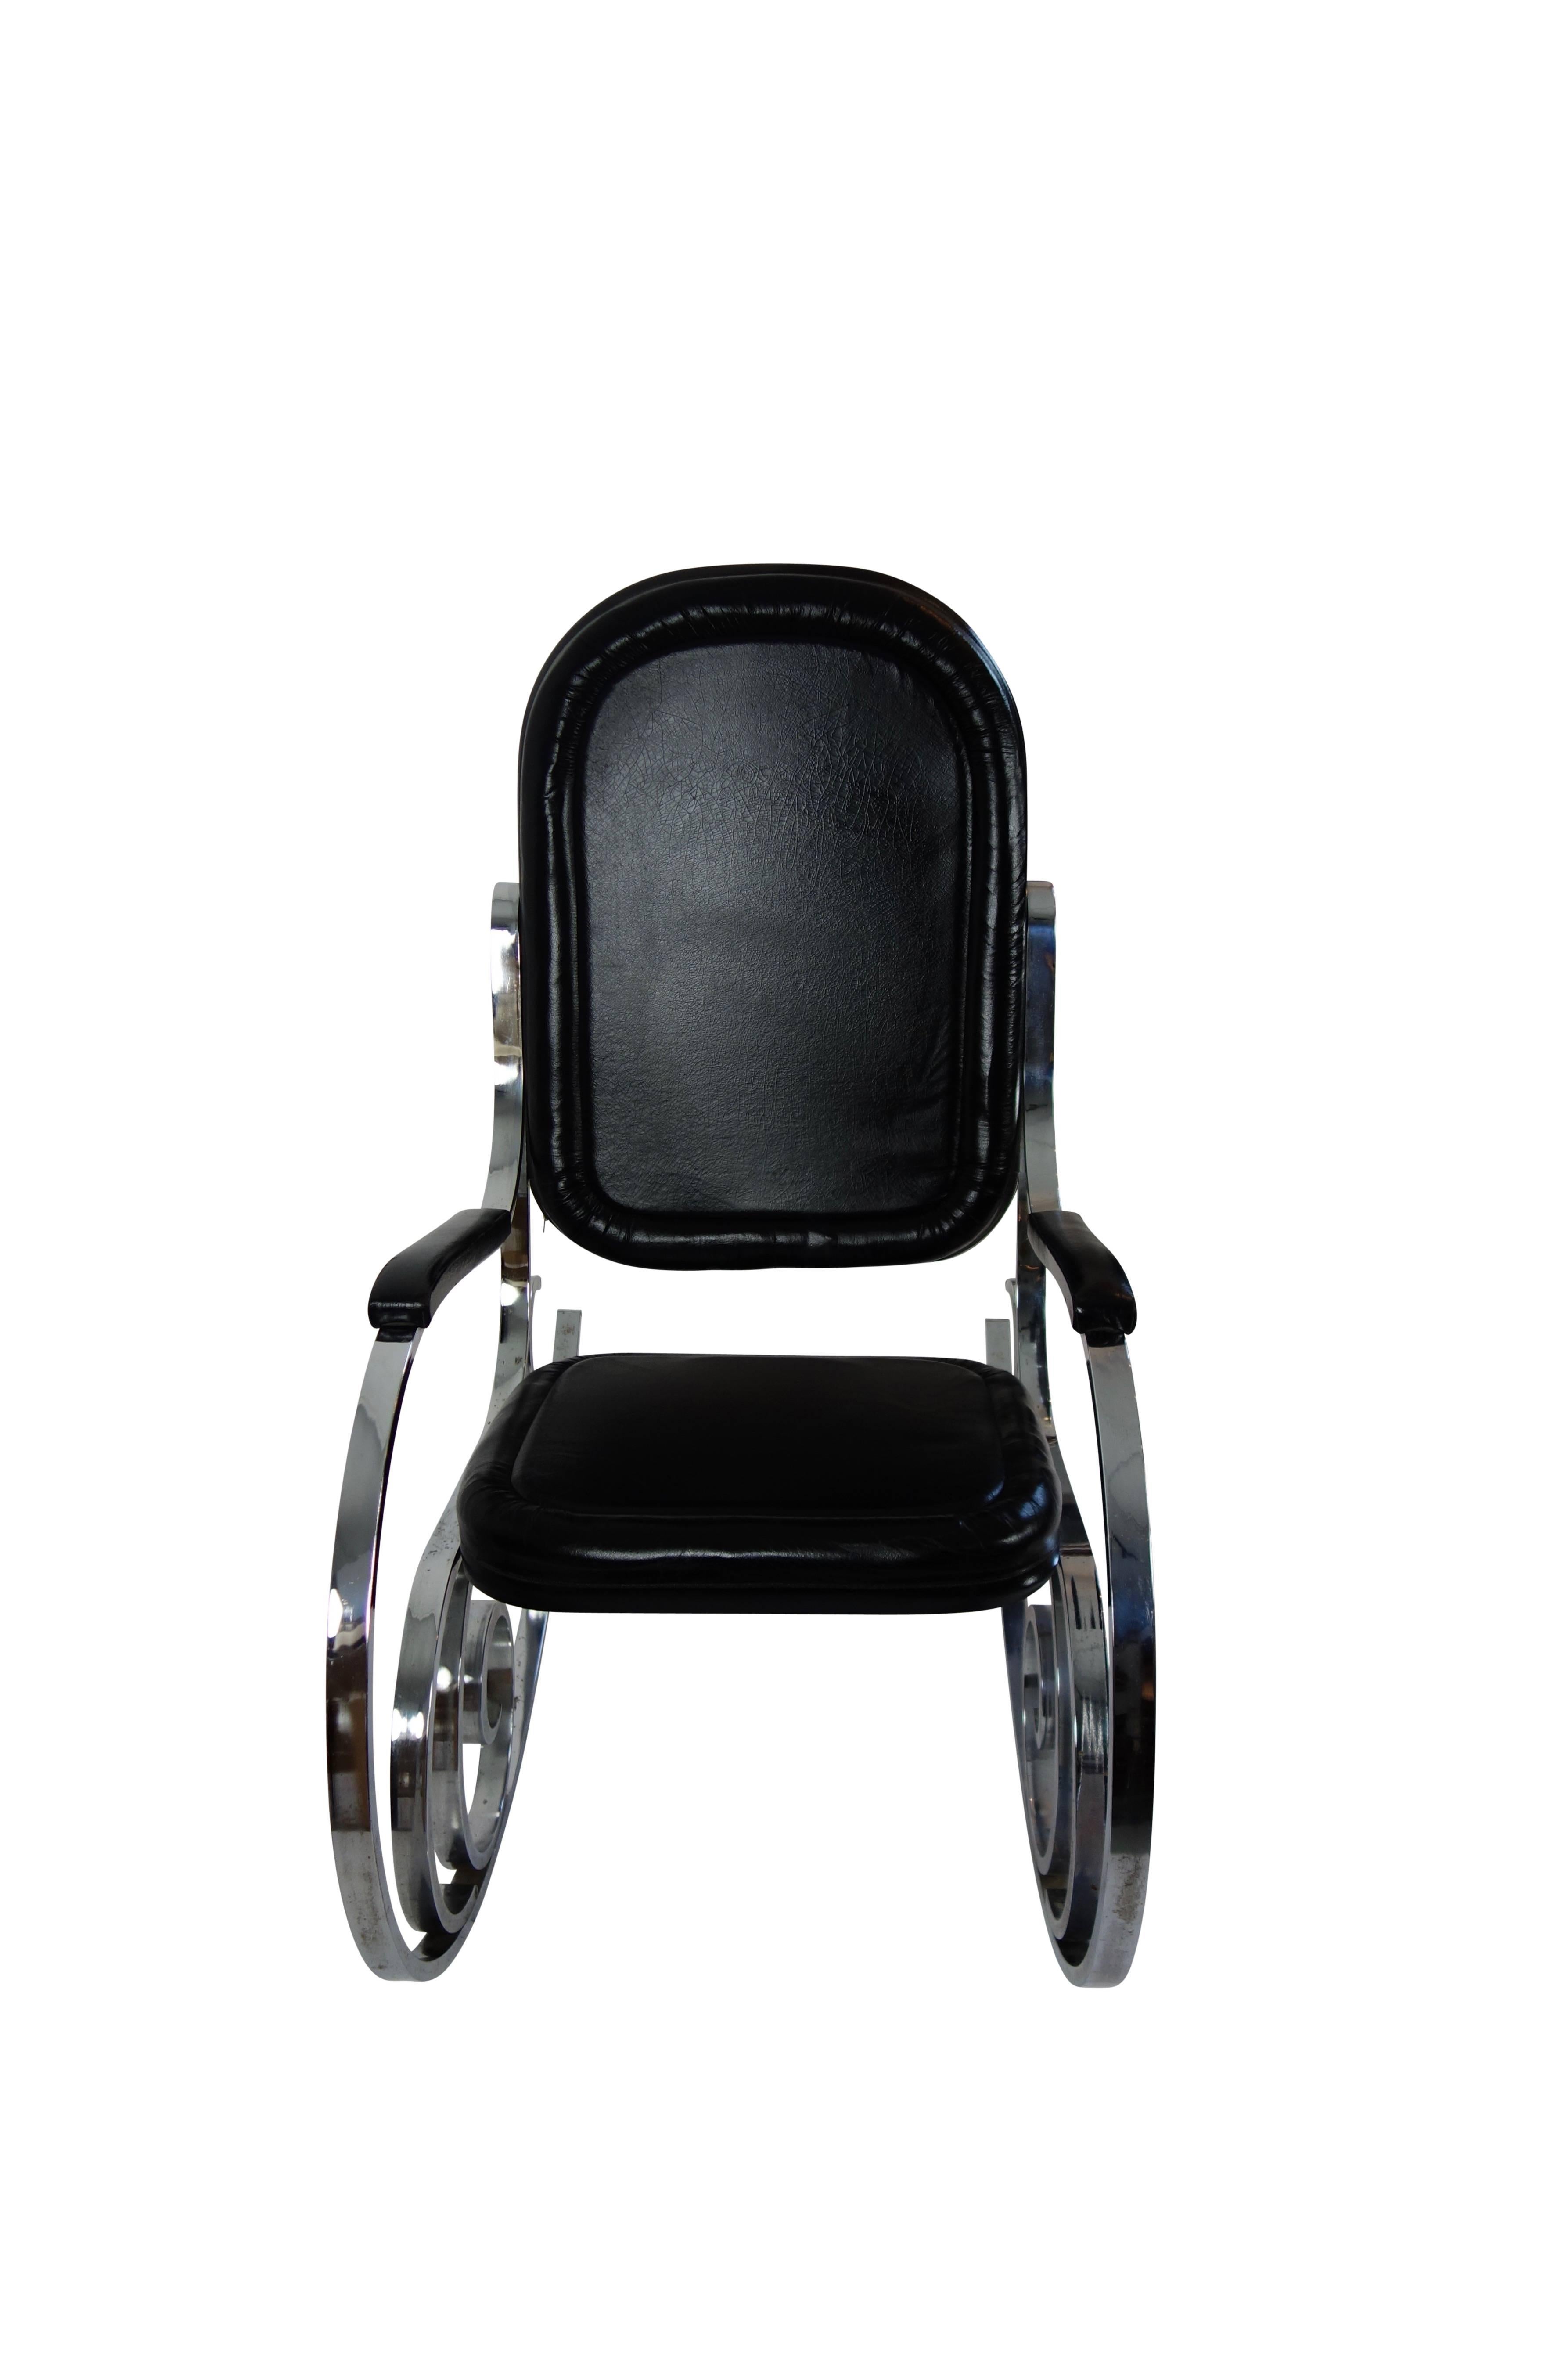 This is a black leather and polished nickel rocking chair by Maison Jansen from France, circa 1970.